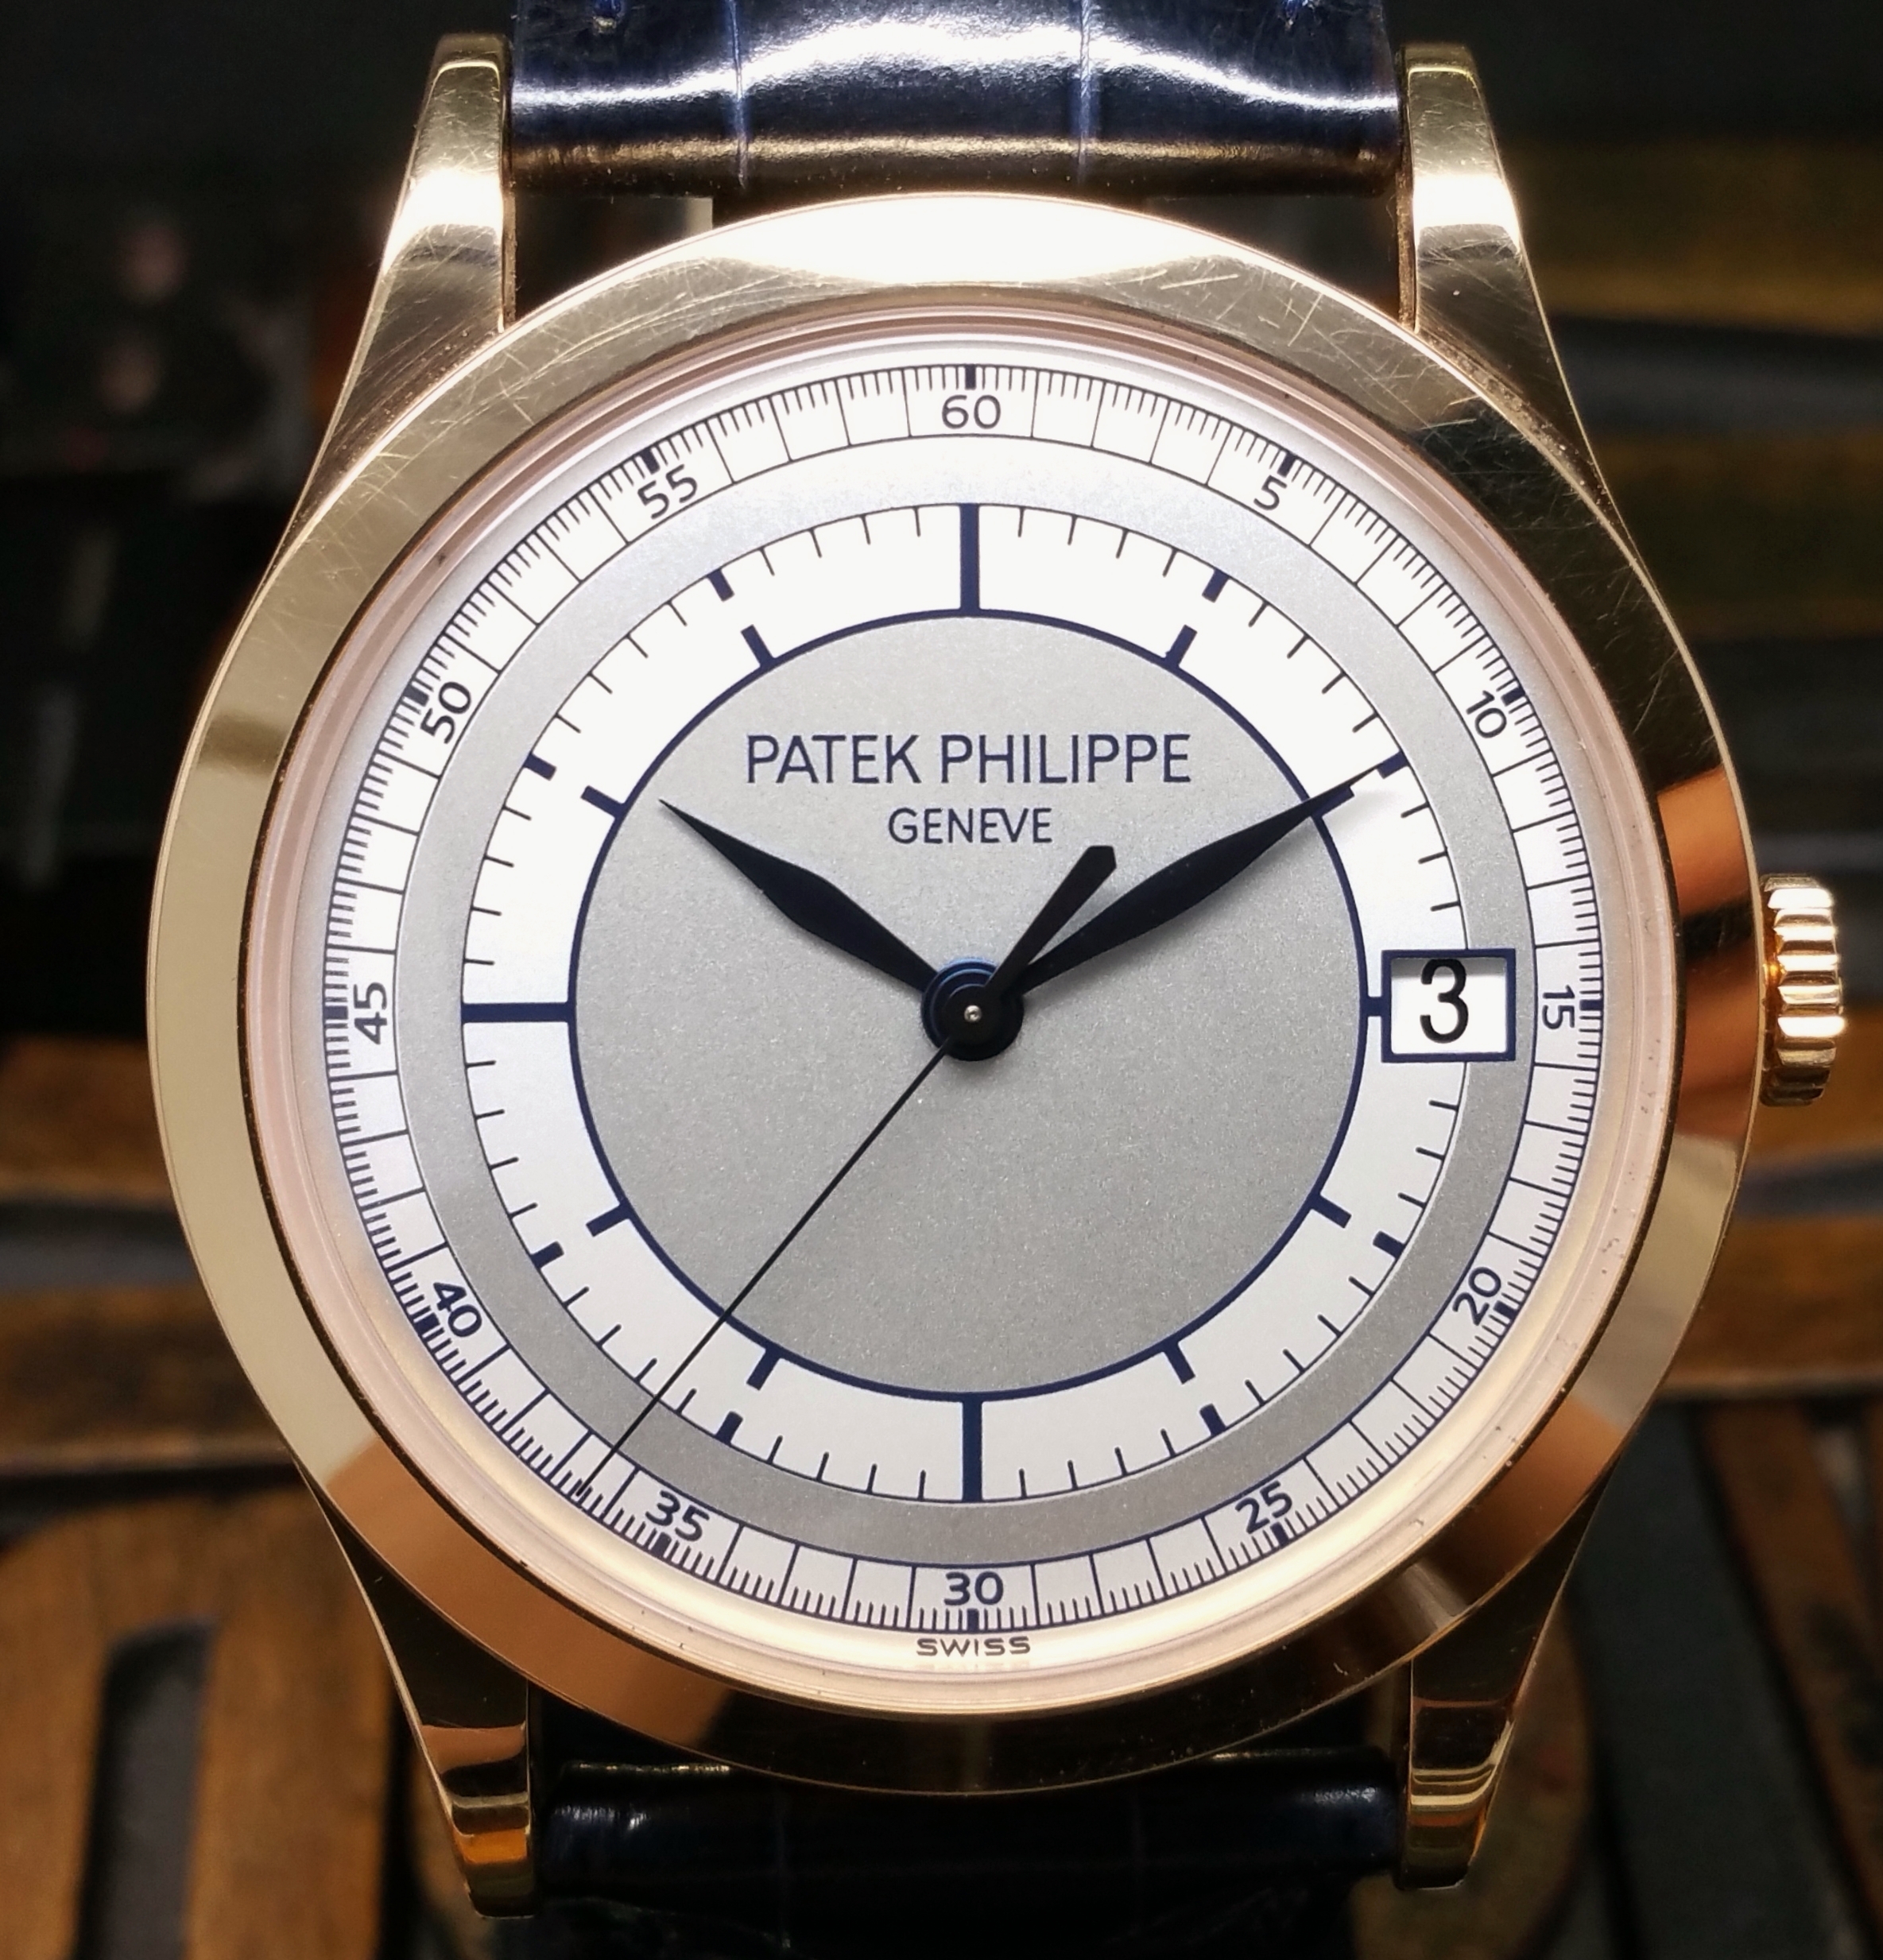 2007 Patek Philippe 5196R-001 Rose Gold Sector Dial with Box & Papers